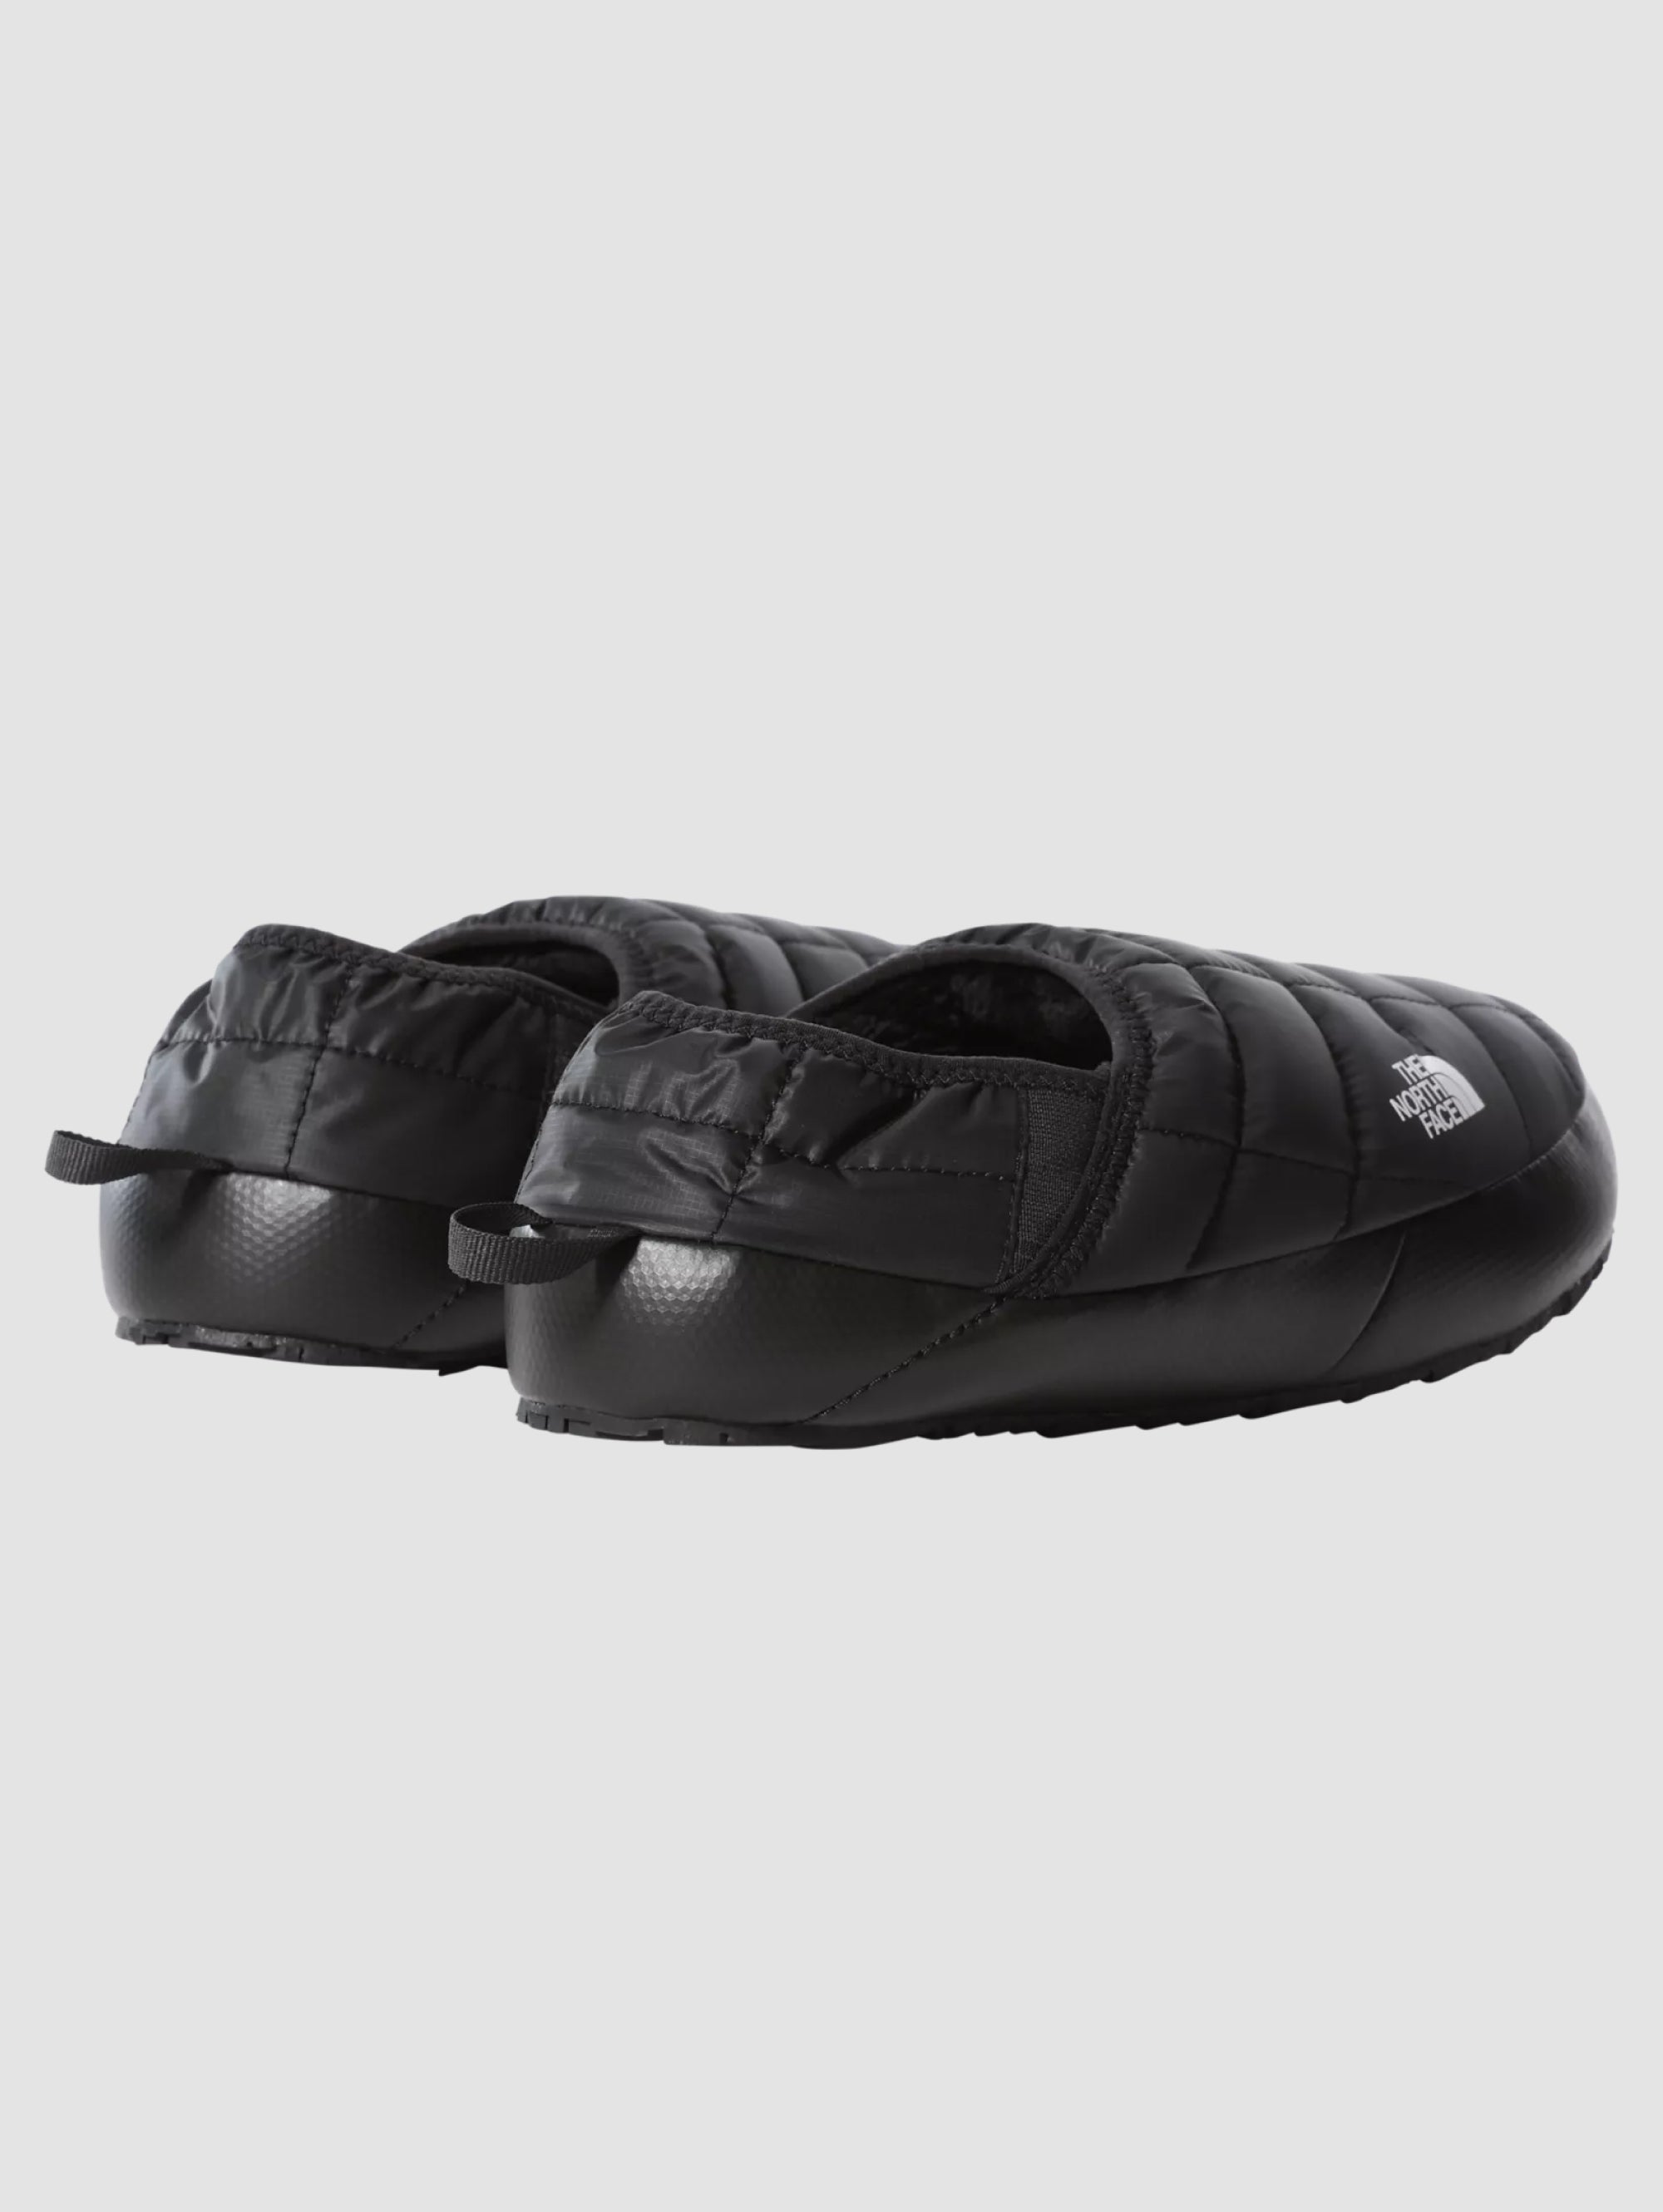 Traction Mule Padded Slippers for Men in Black